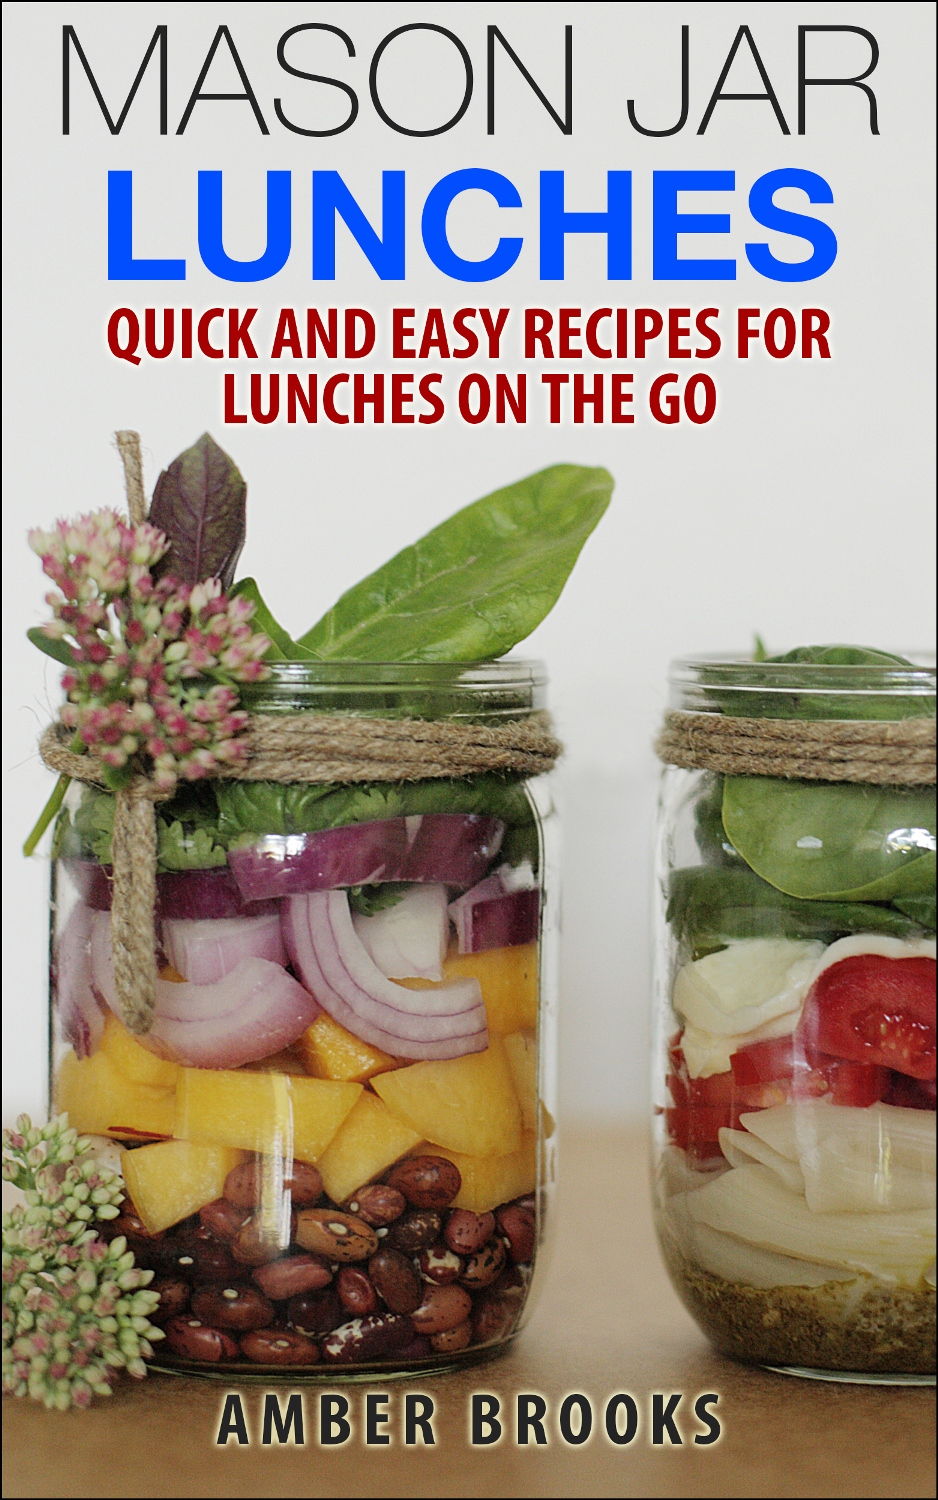 Mason Jar Lunches: Quick and Easy Recipes for Lunches on the Go, in a Jar by Amber Brooks